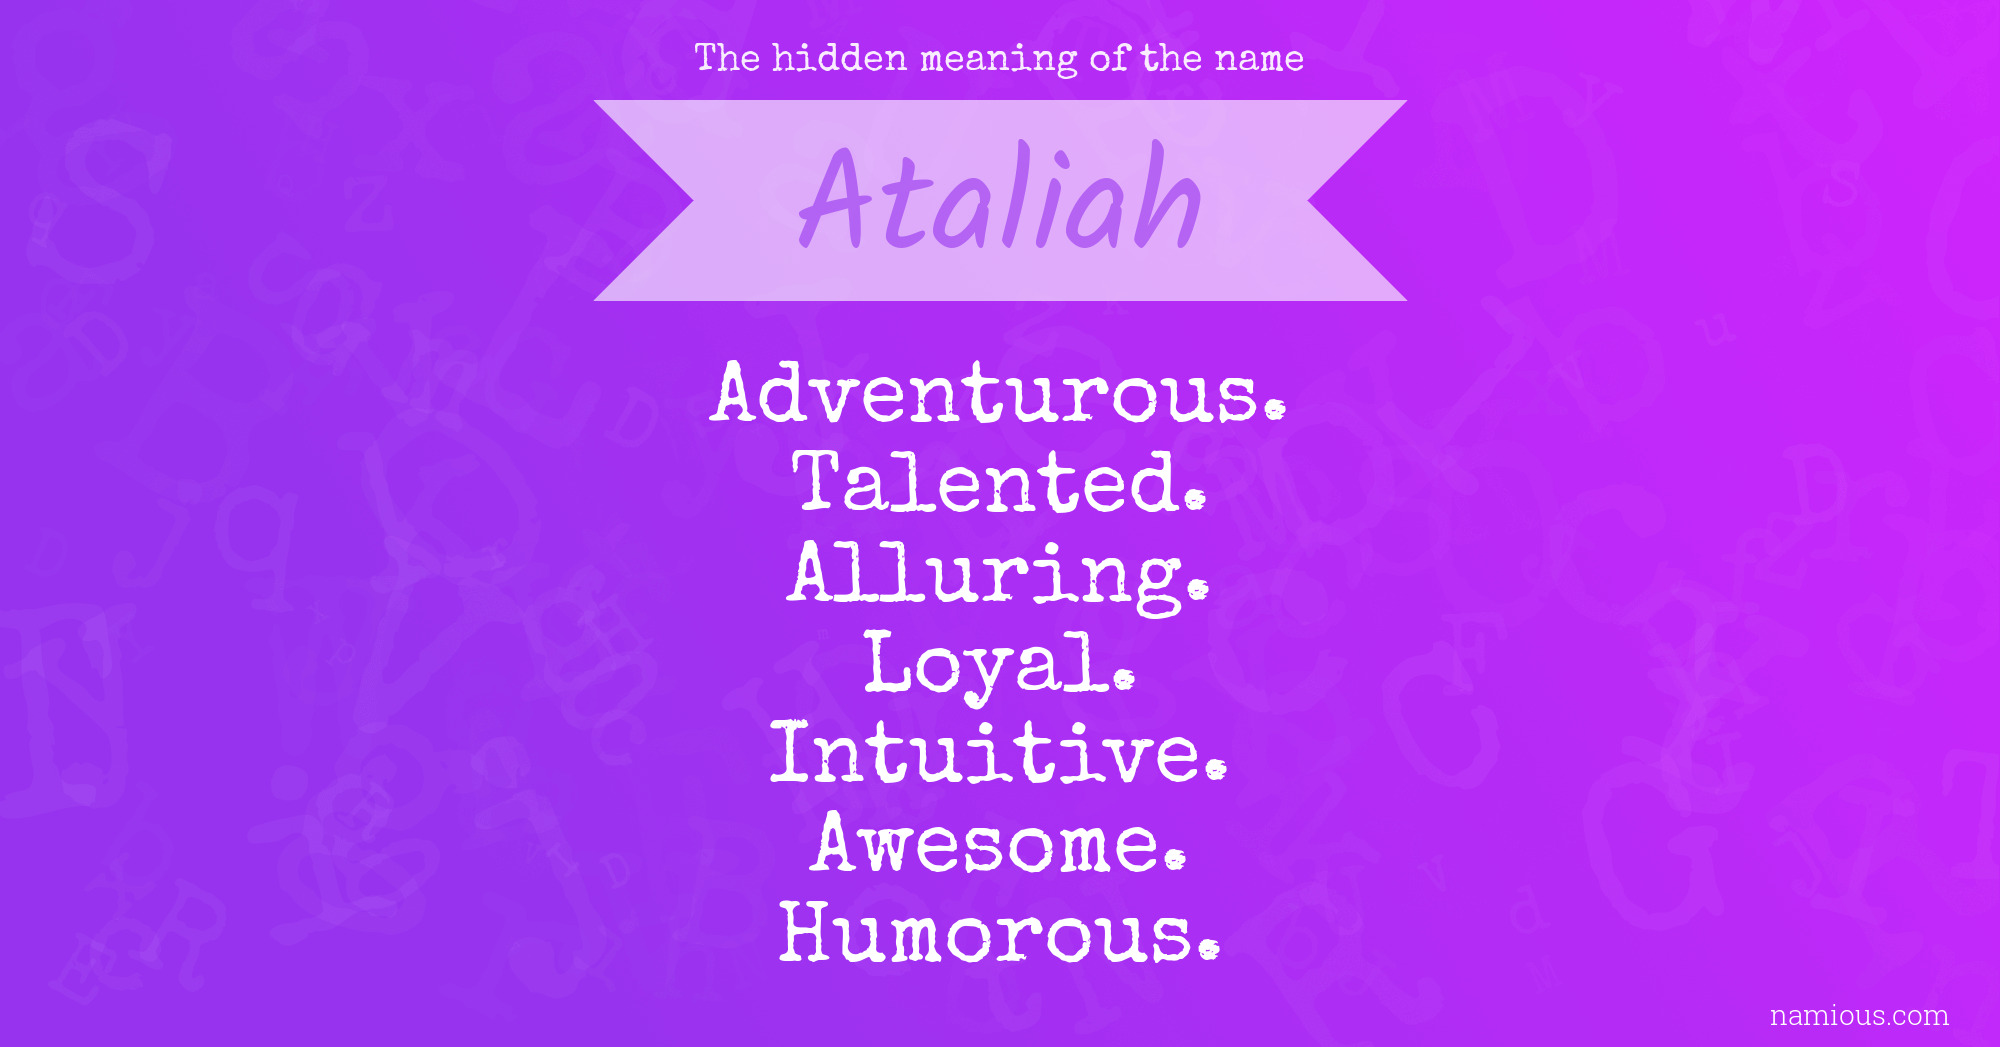 The hidden meaning of the name Ataliah